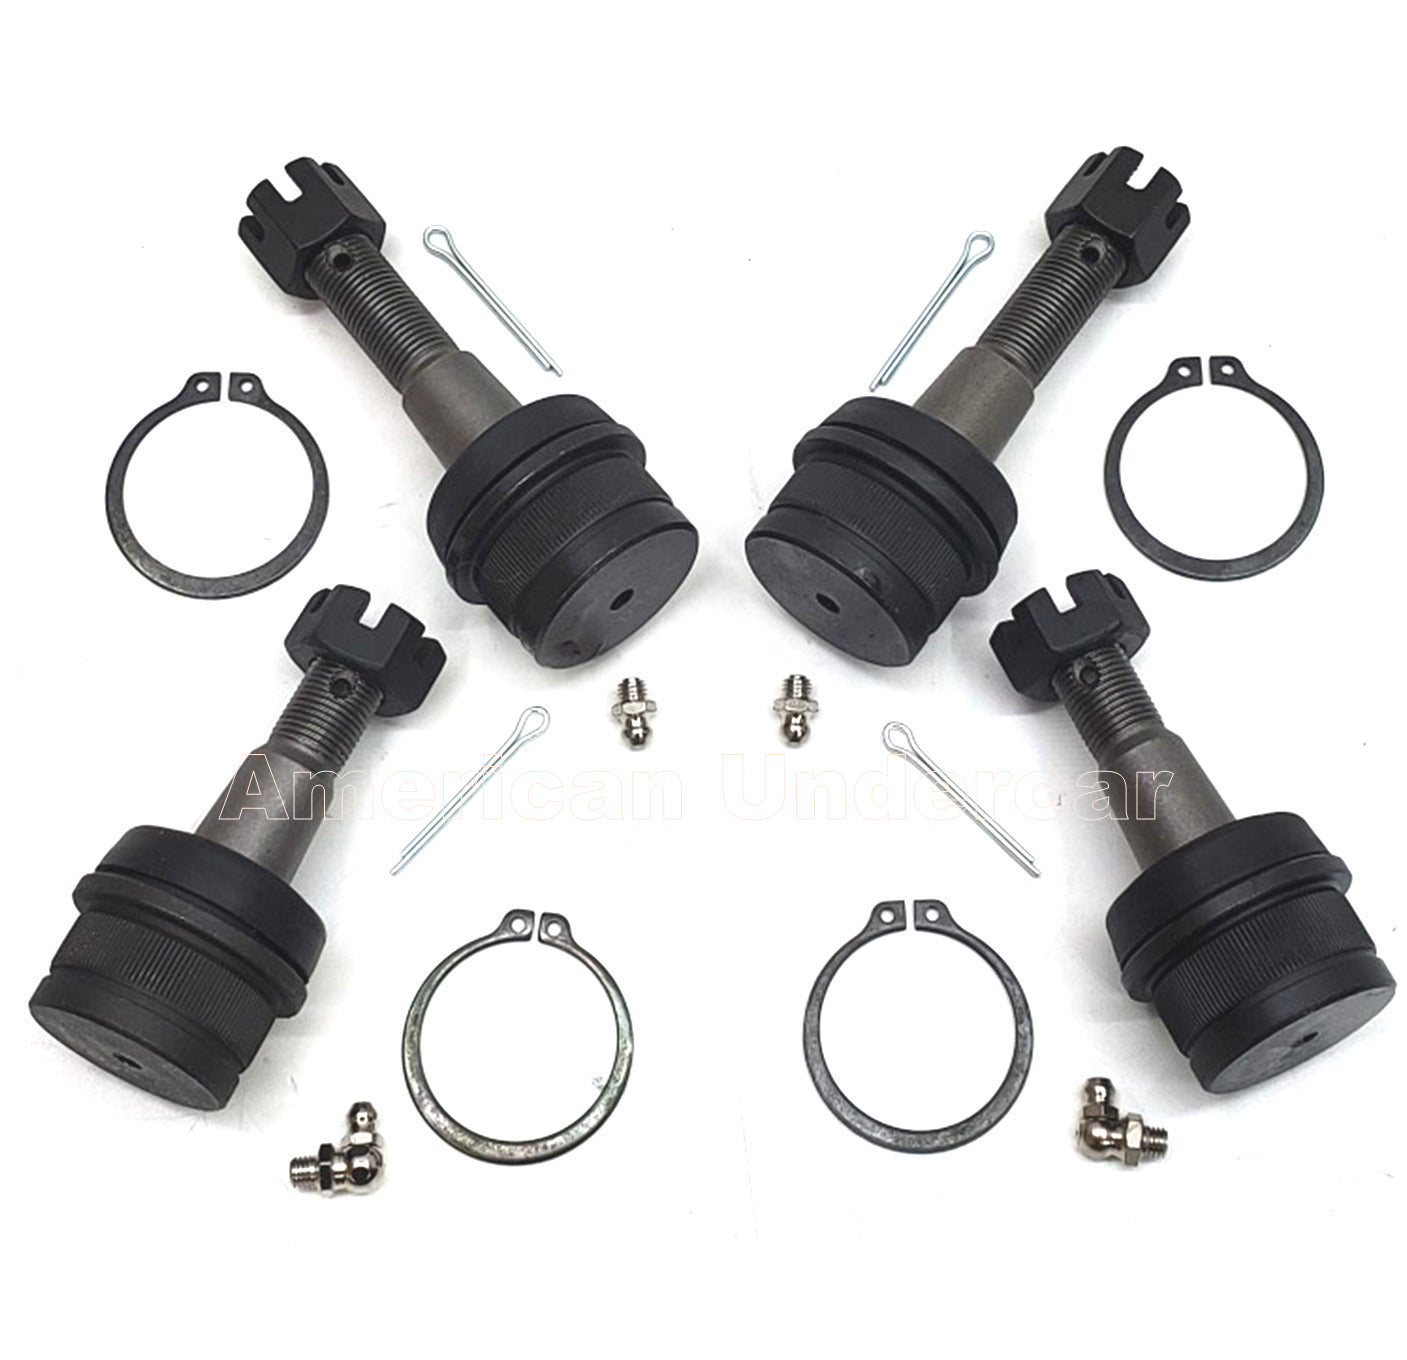 XRF Ball Joint Upper and Lower Suspension Kit for 1984-1990 Ford Bronco II 4x4